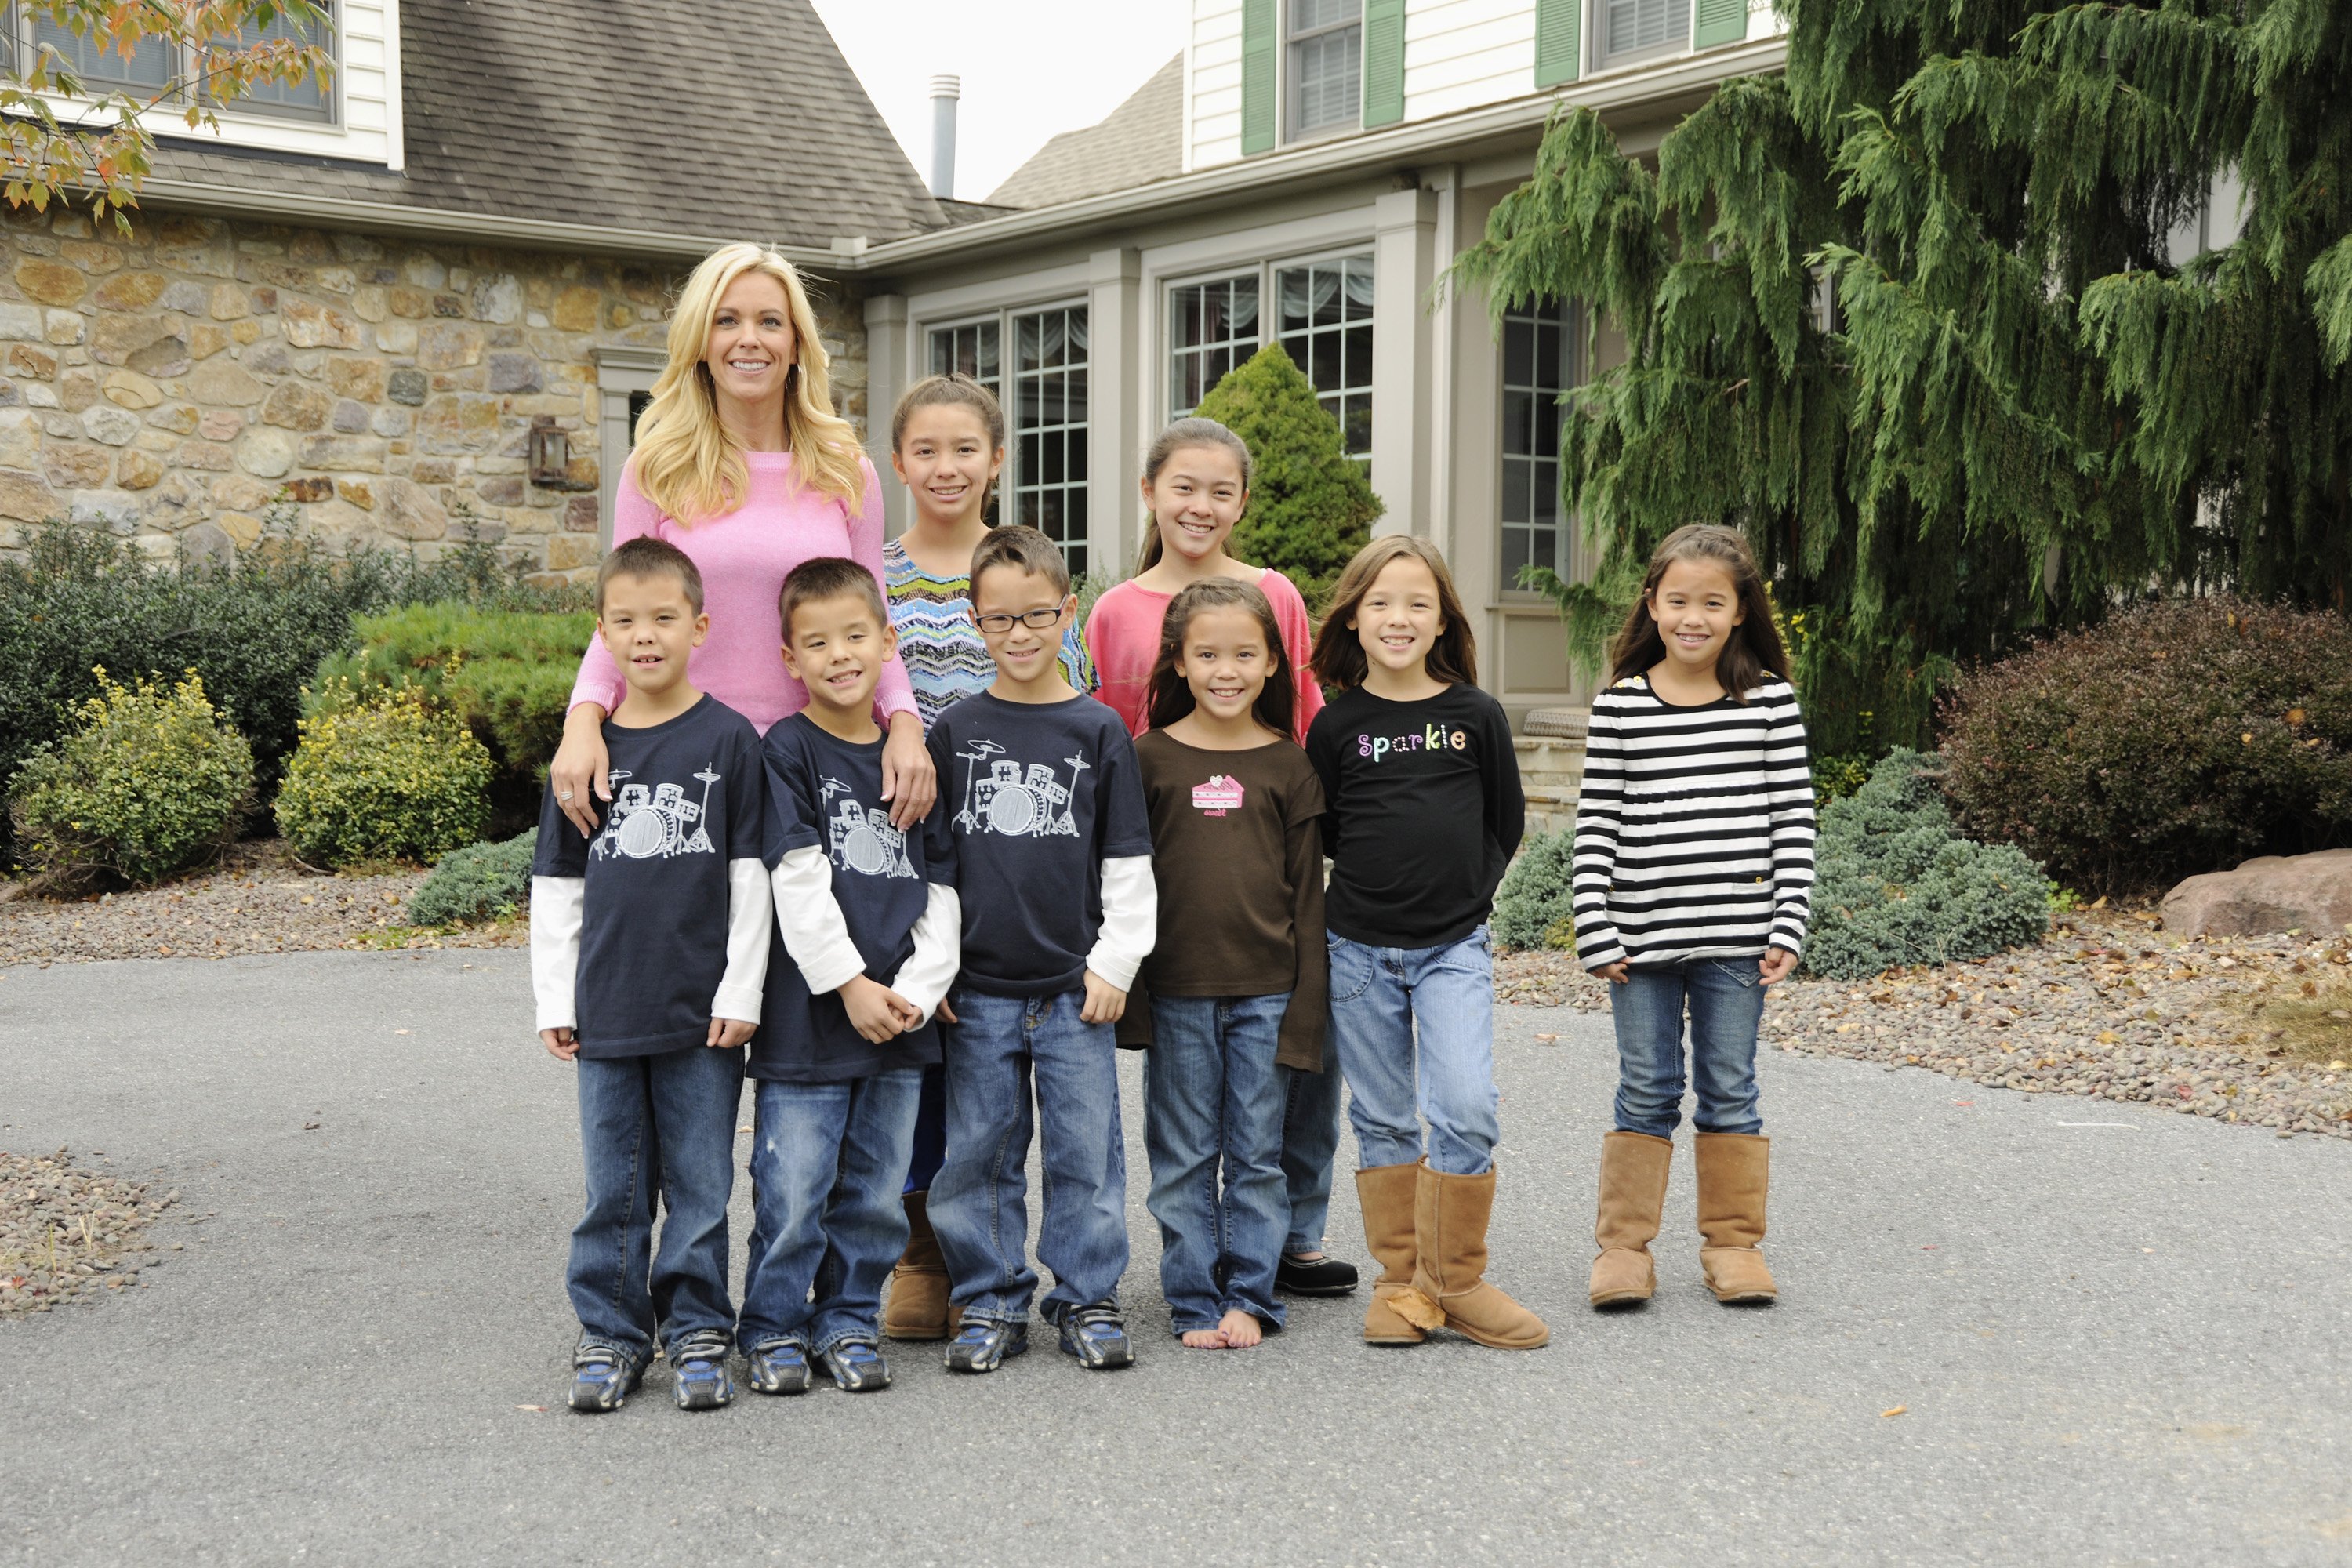 Kate Gosselin and her children, Joel, Collin, Madelyn "Mady", Aaden, Cara, Leah, Alexis, and Hannah | Source: Getty Images 